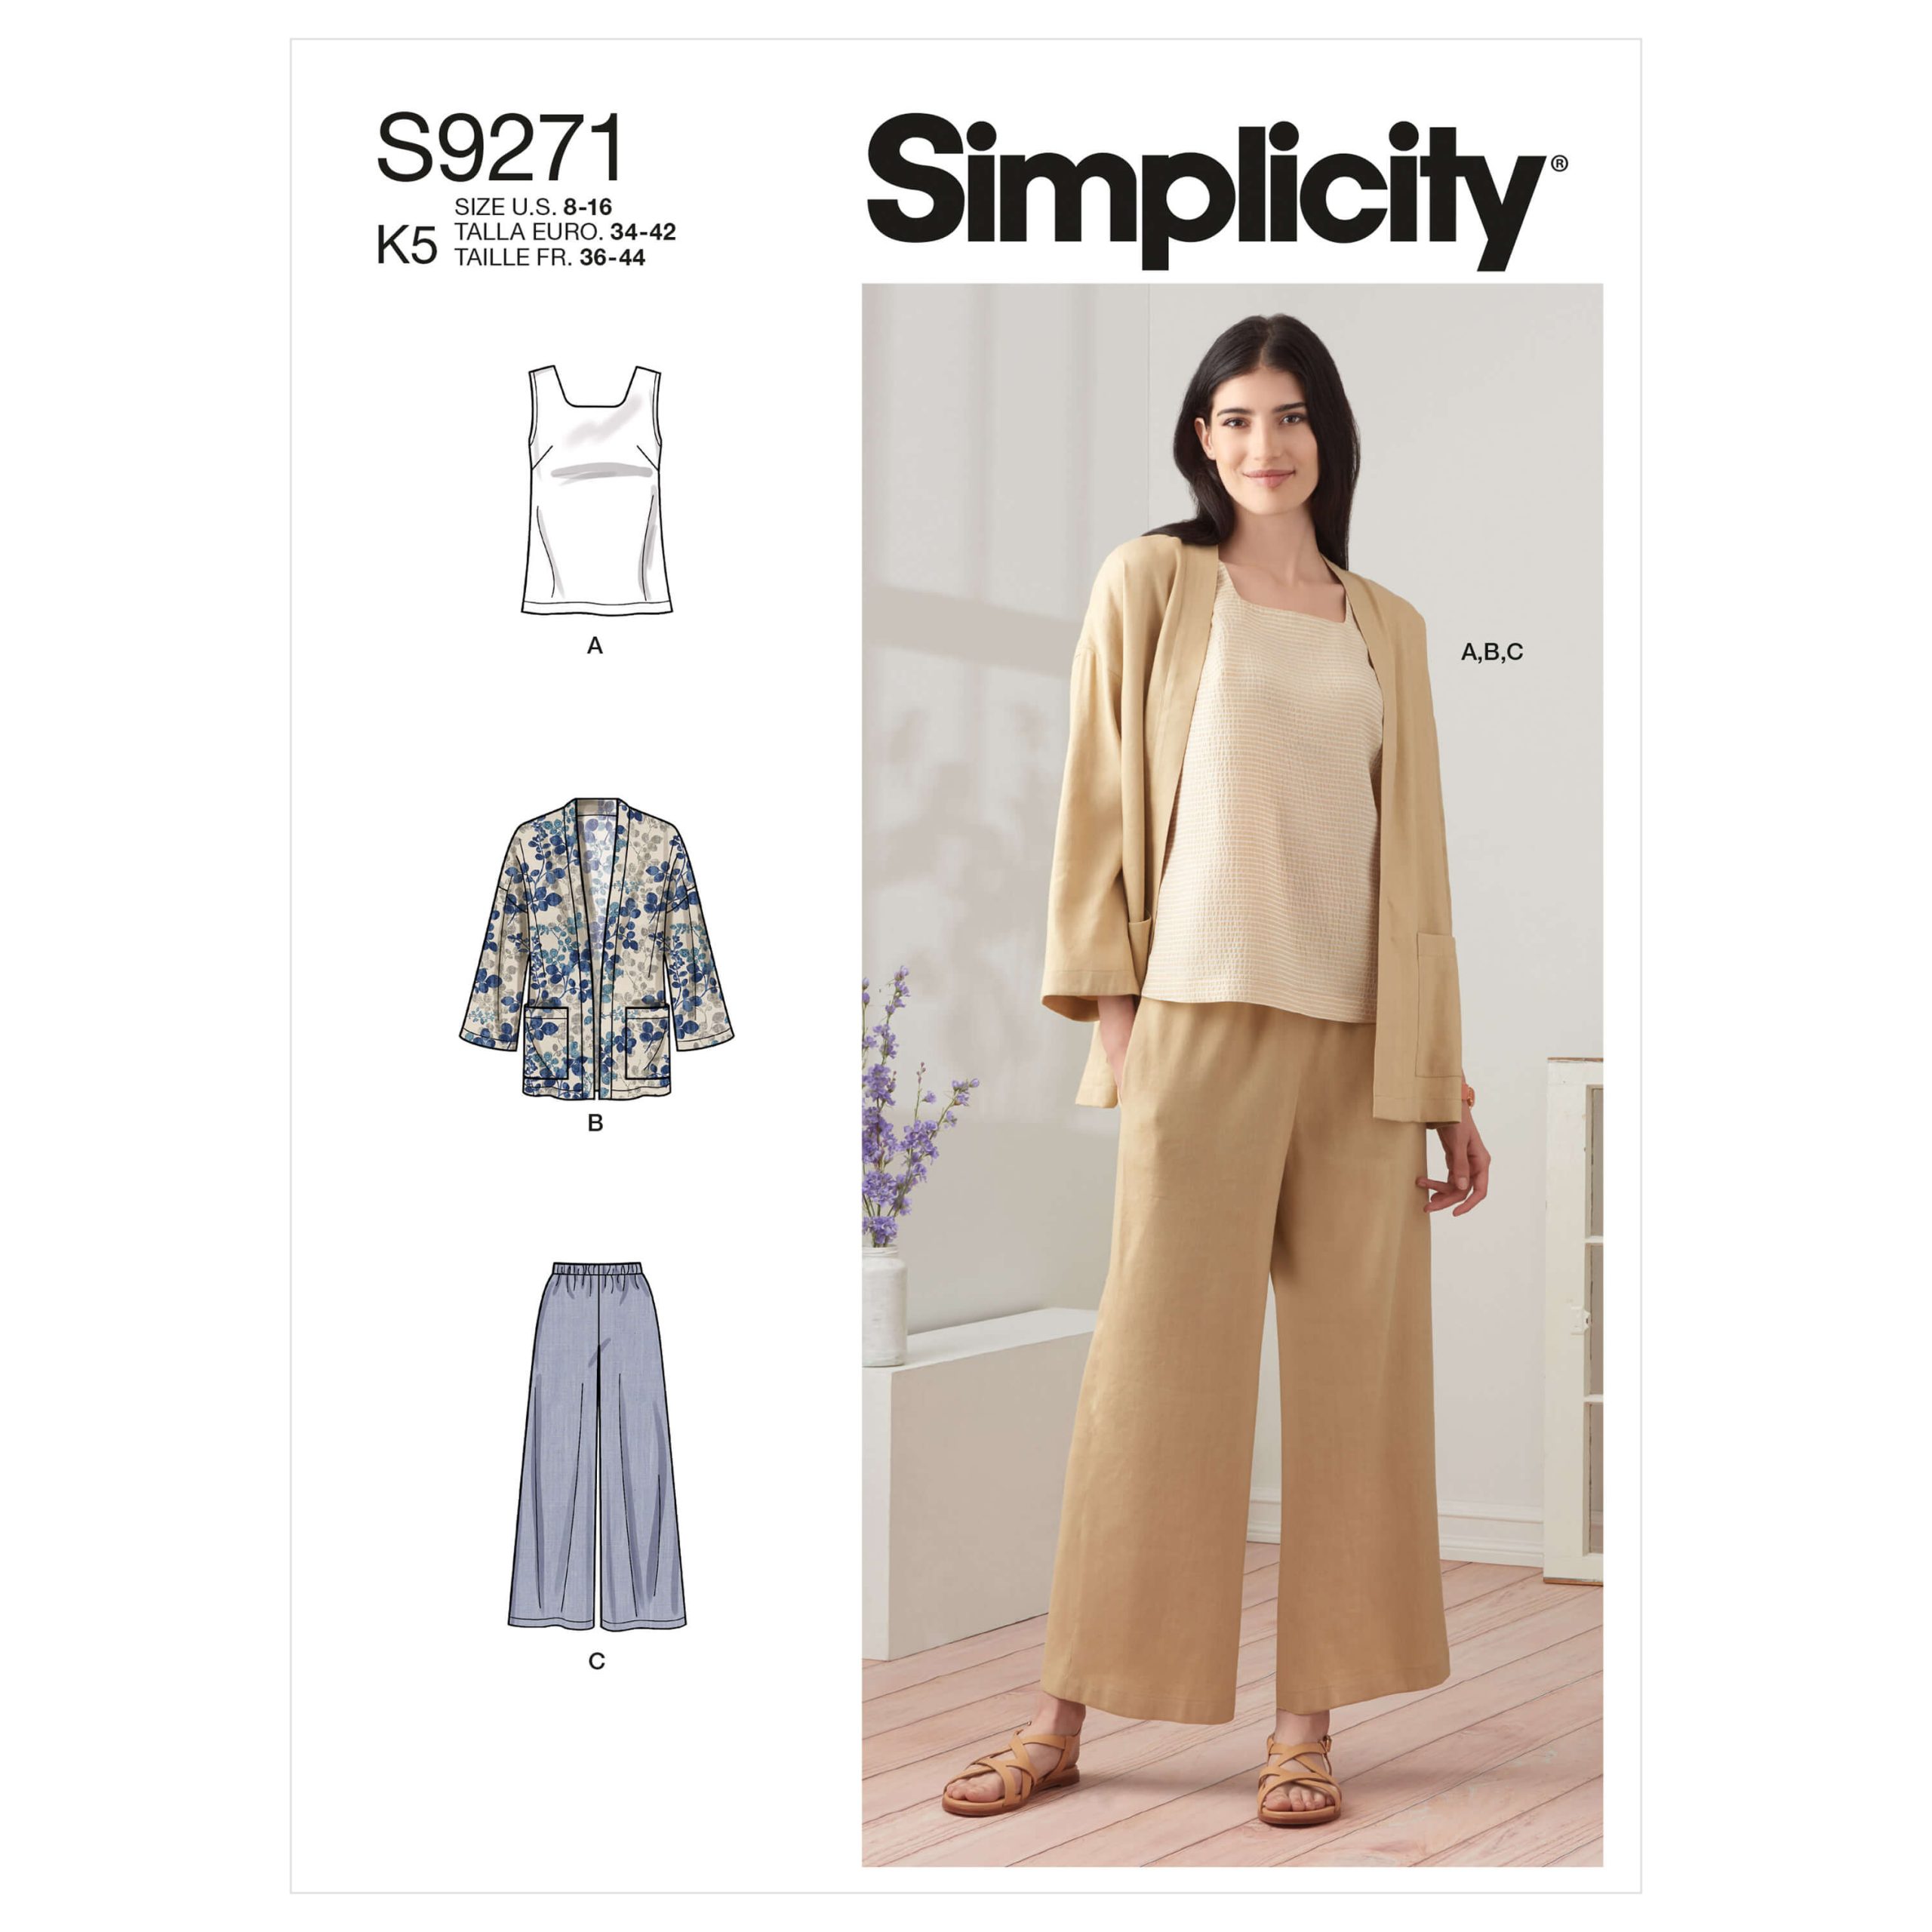 Simplicity Sewing Pattern S9271 Misses' Jacket, Top and Trousers